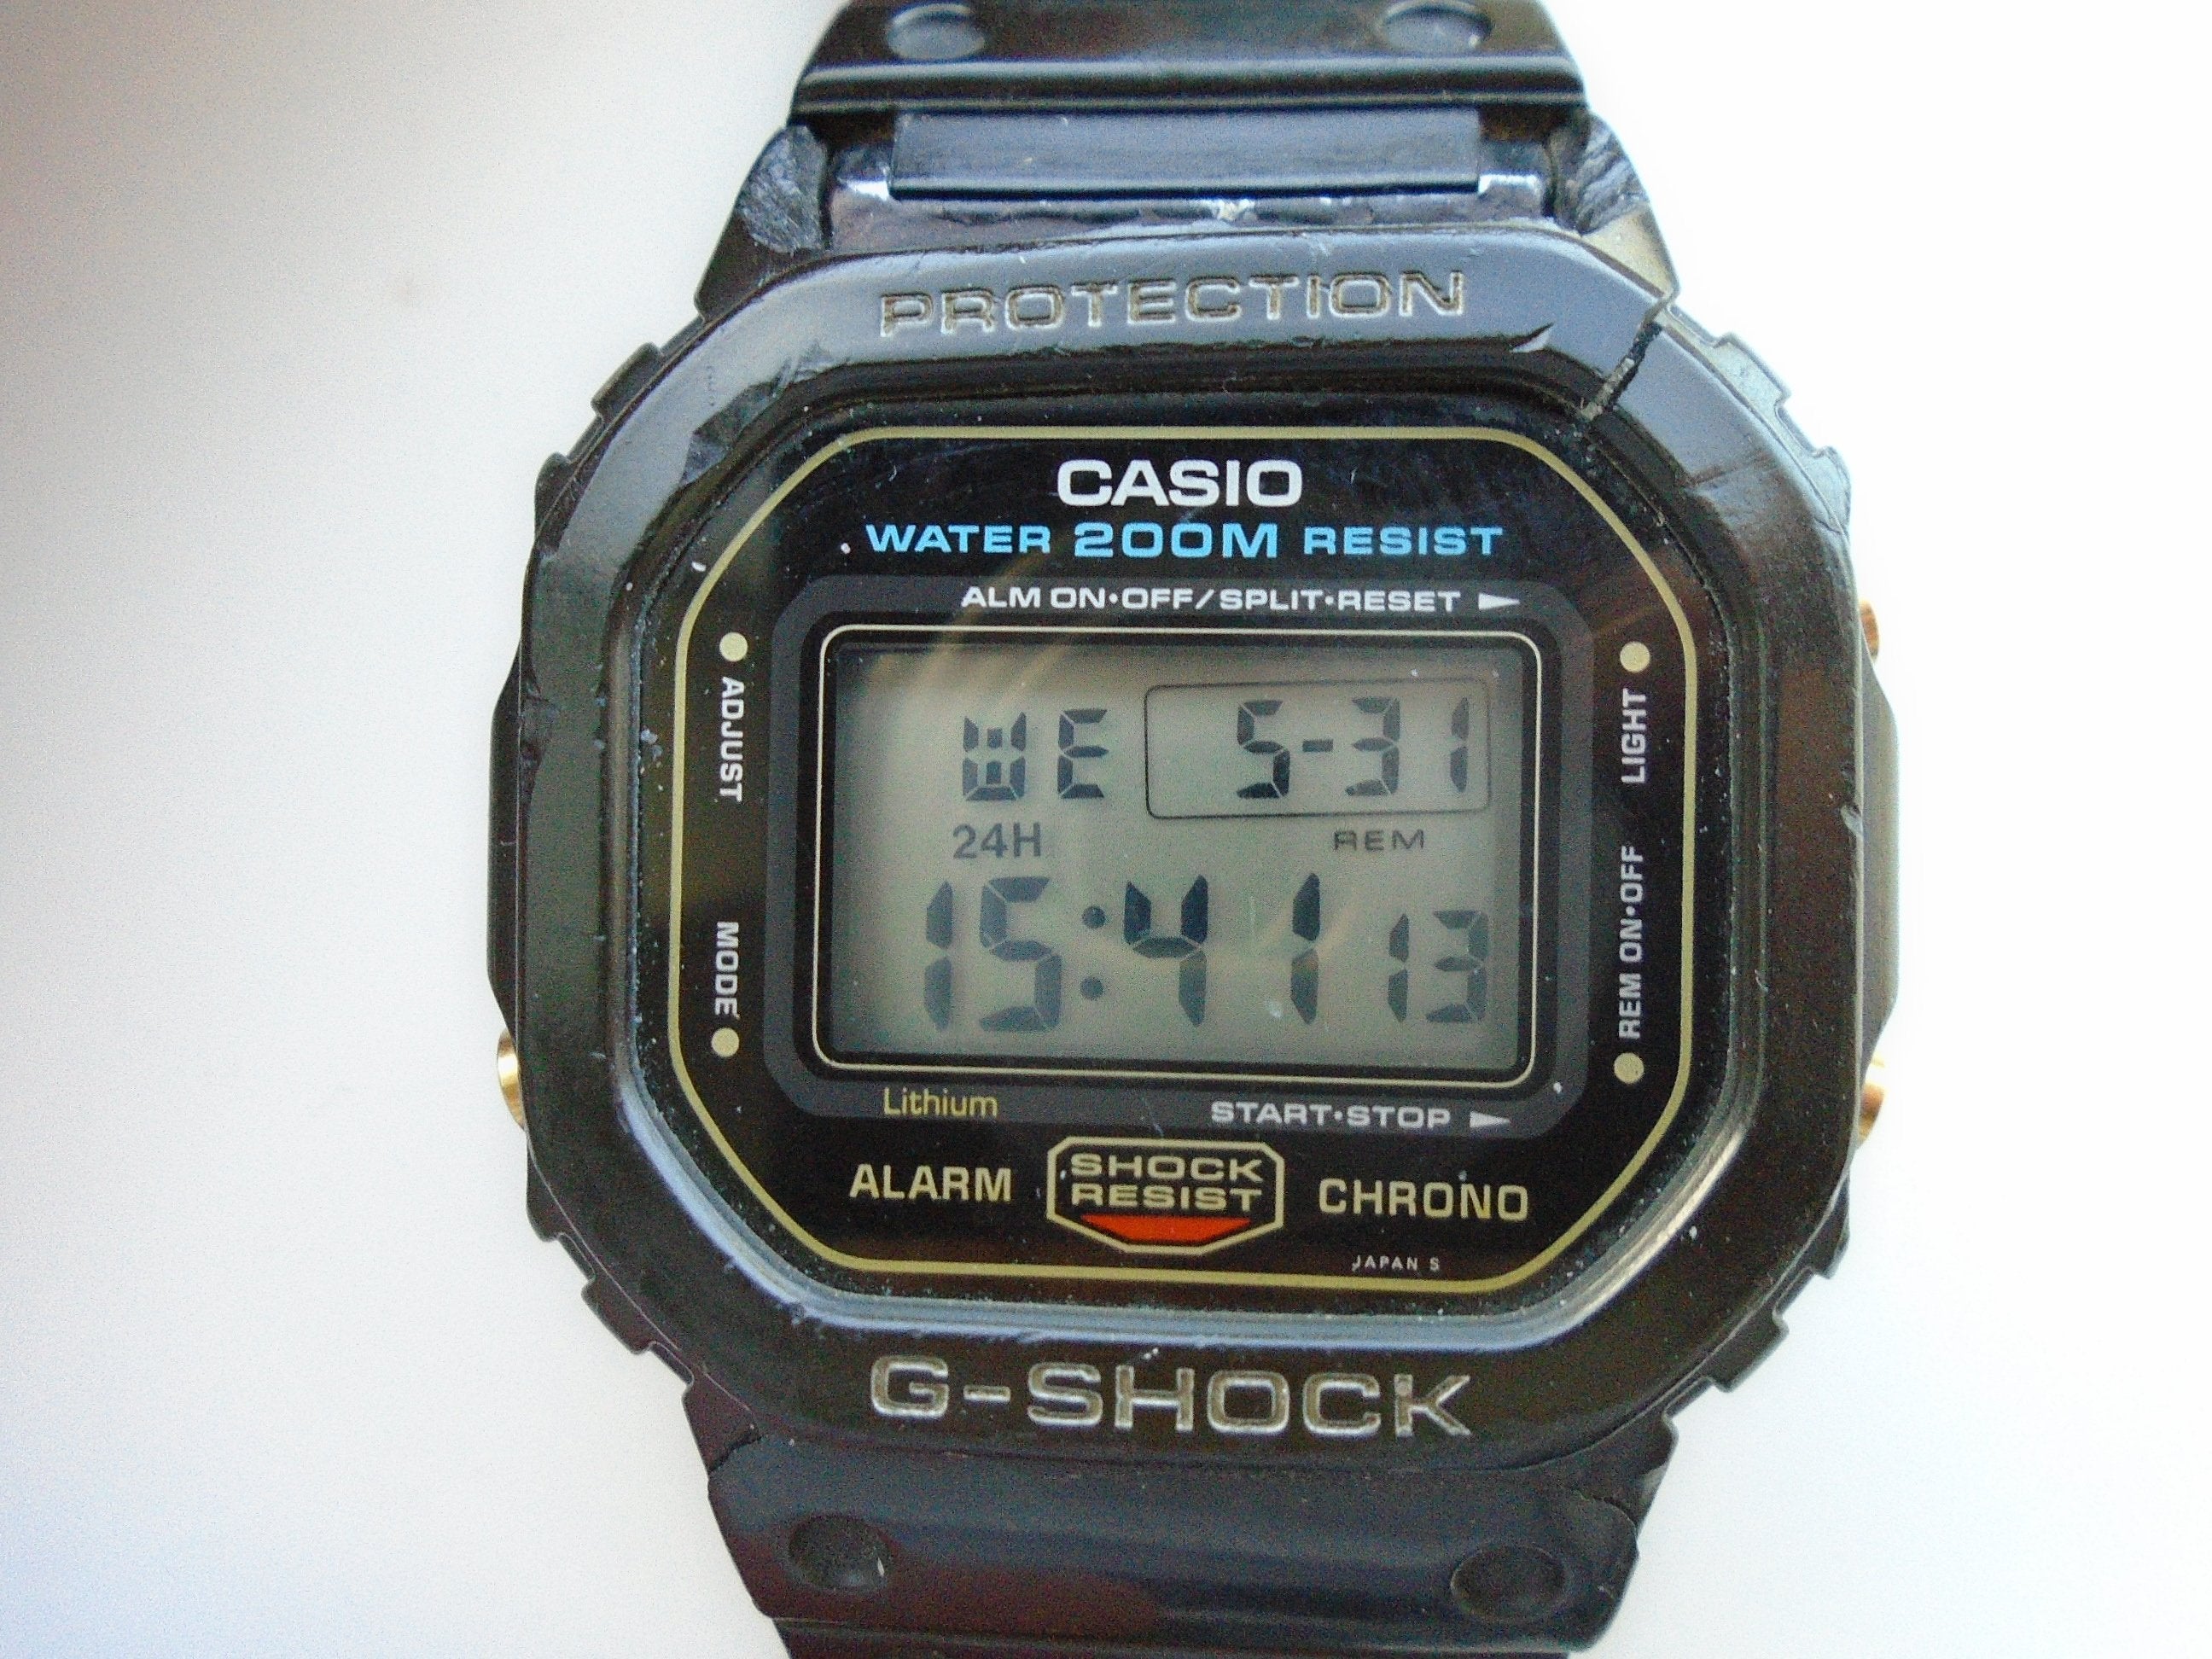 Replacement Bezel for Casio G-Shock DW-5600 [691]